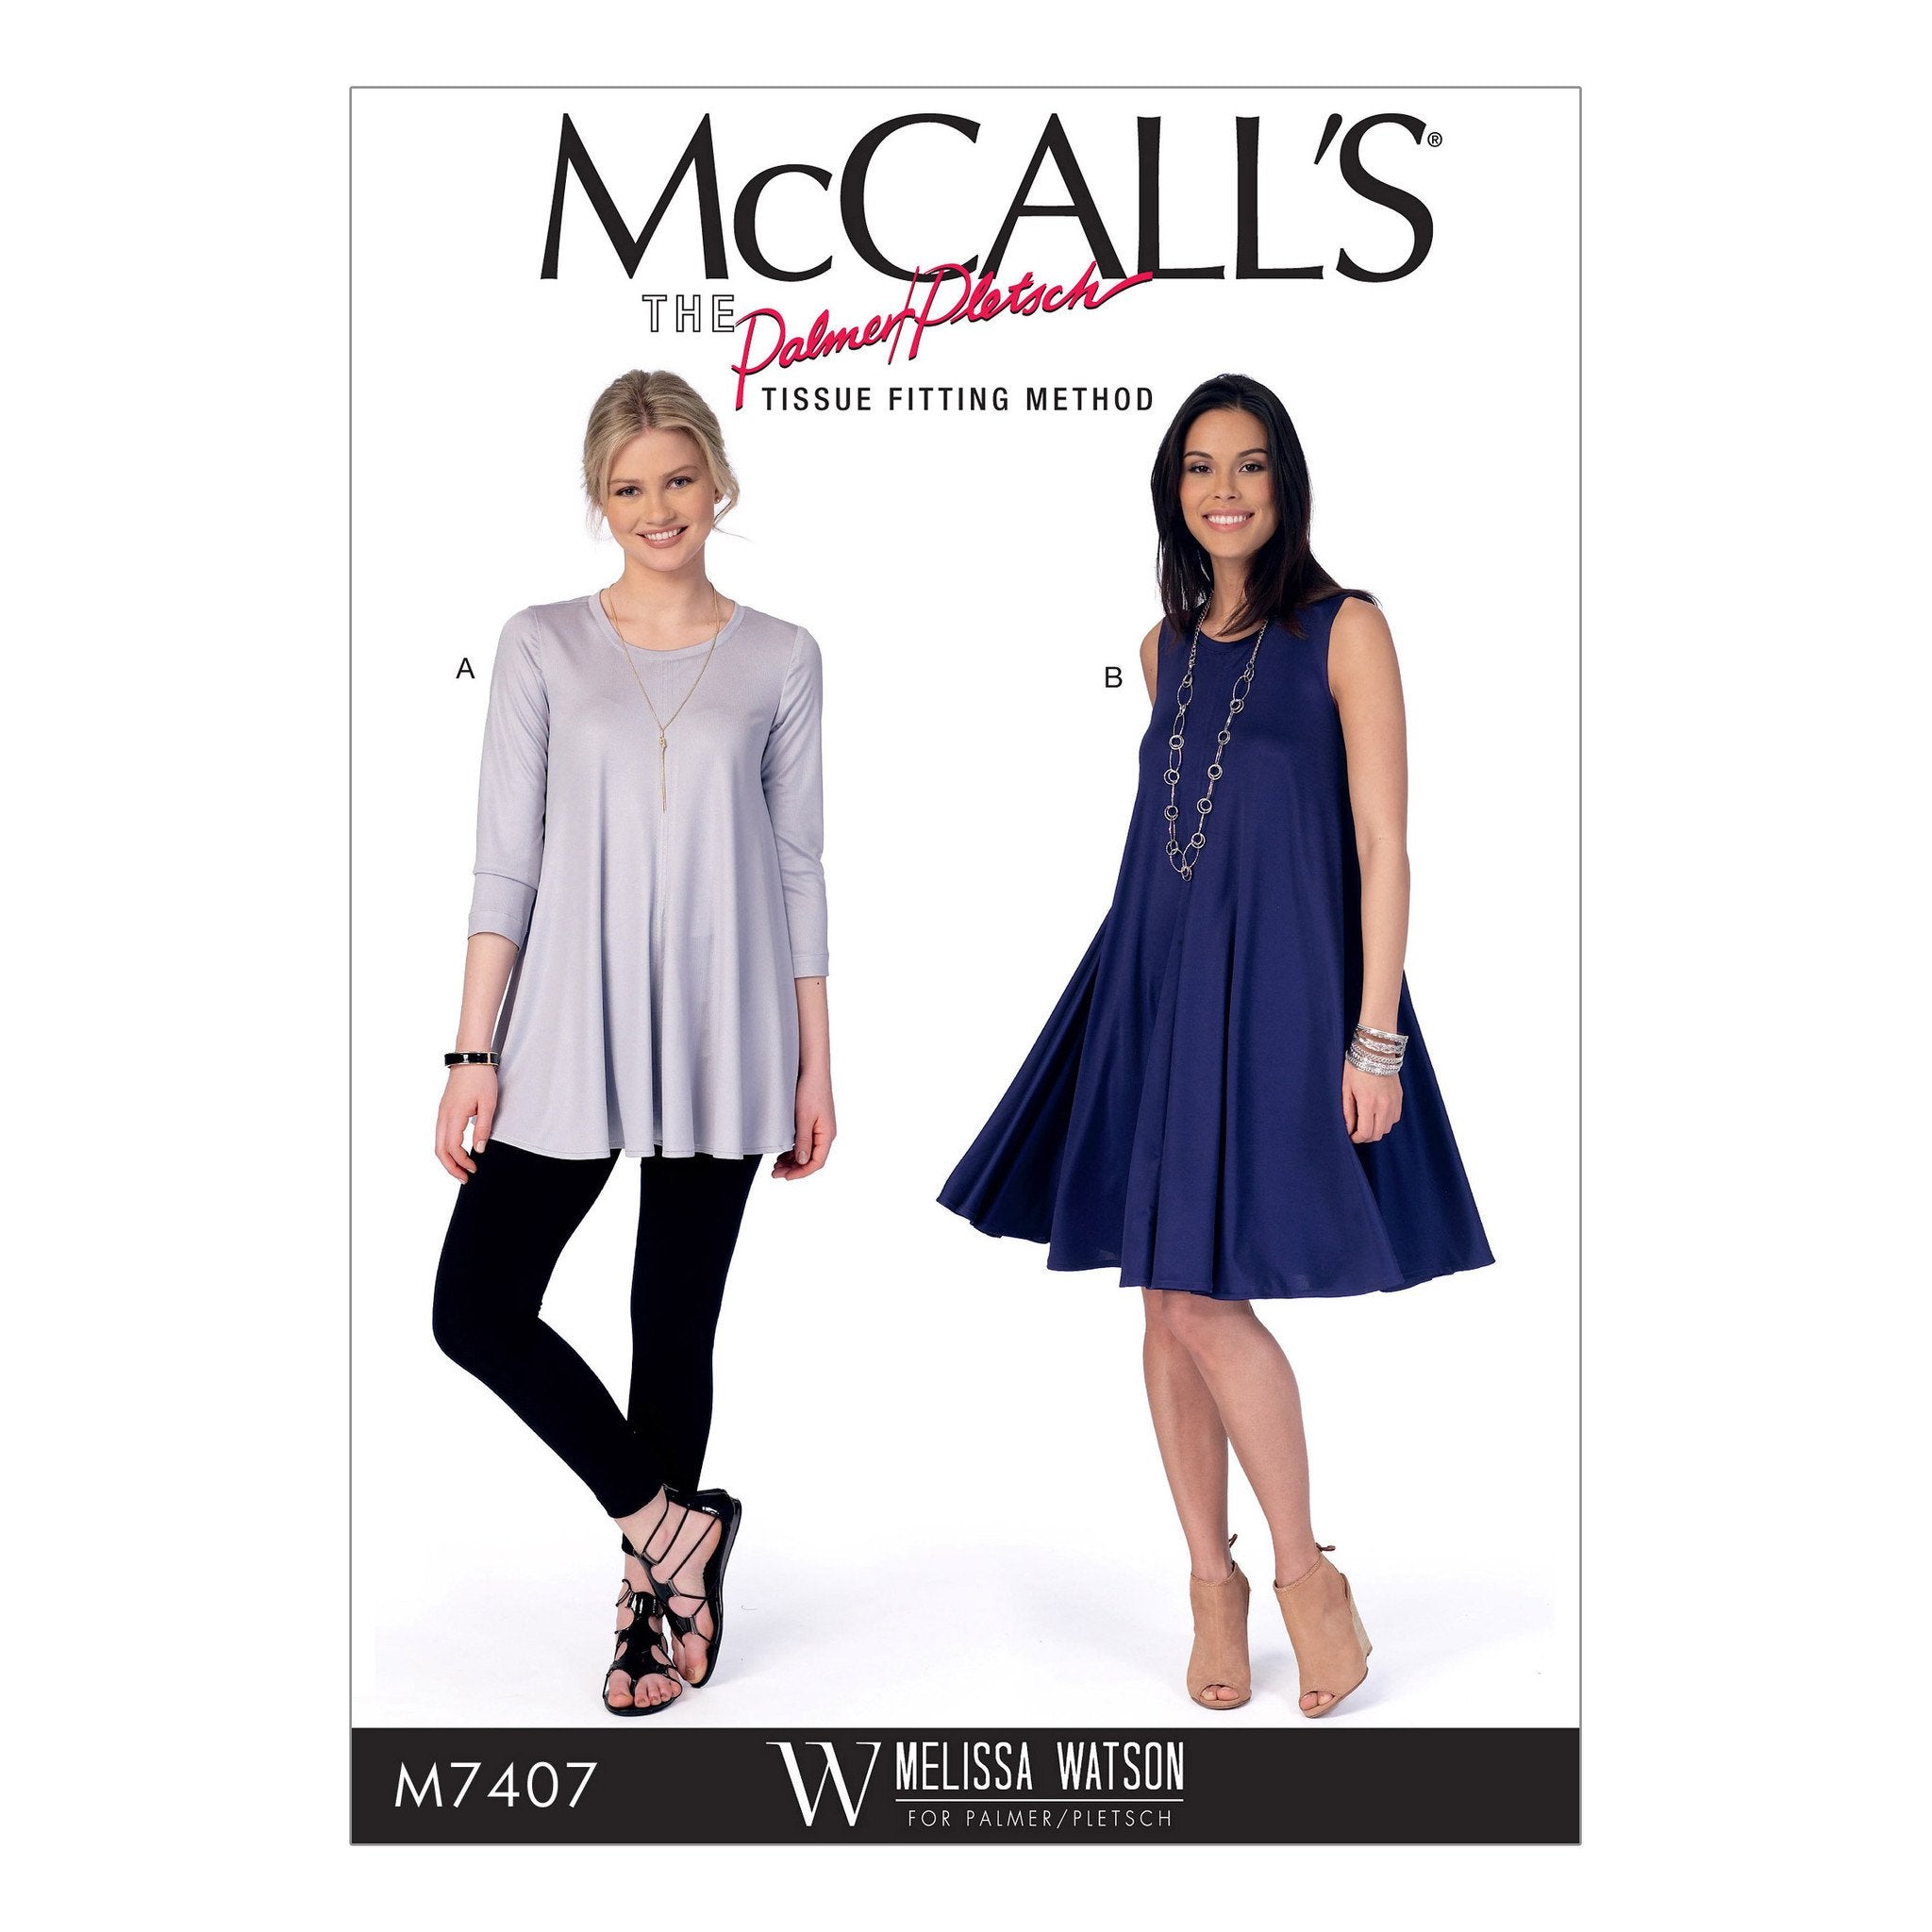 M7407 Top and Dress McCalls pattern from Jaycotts Sewing Supplies